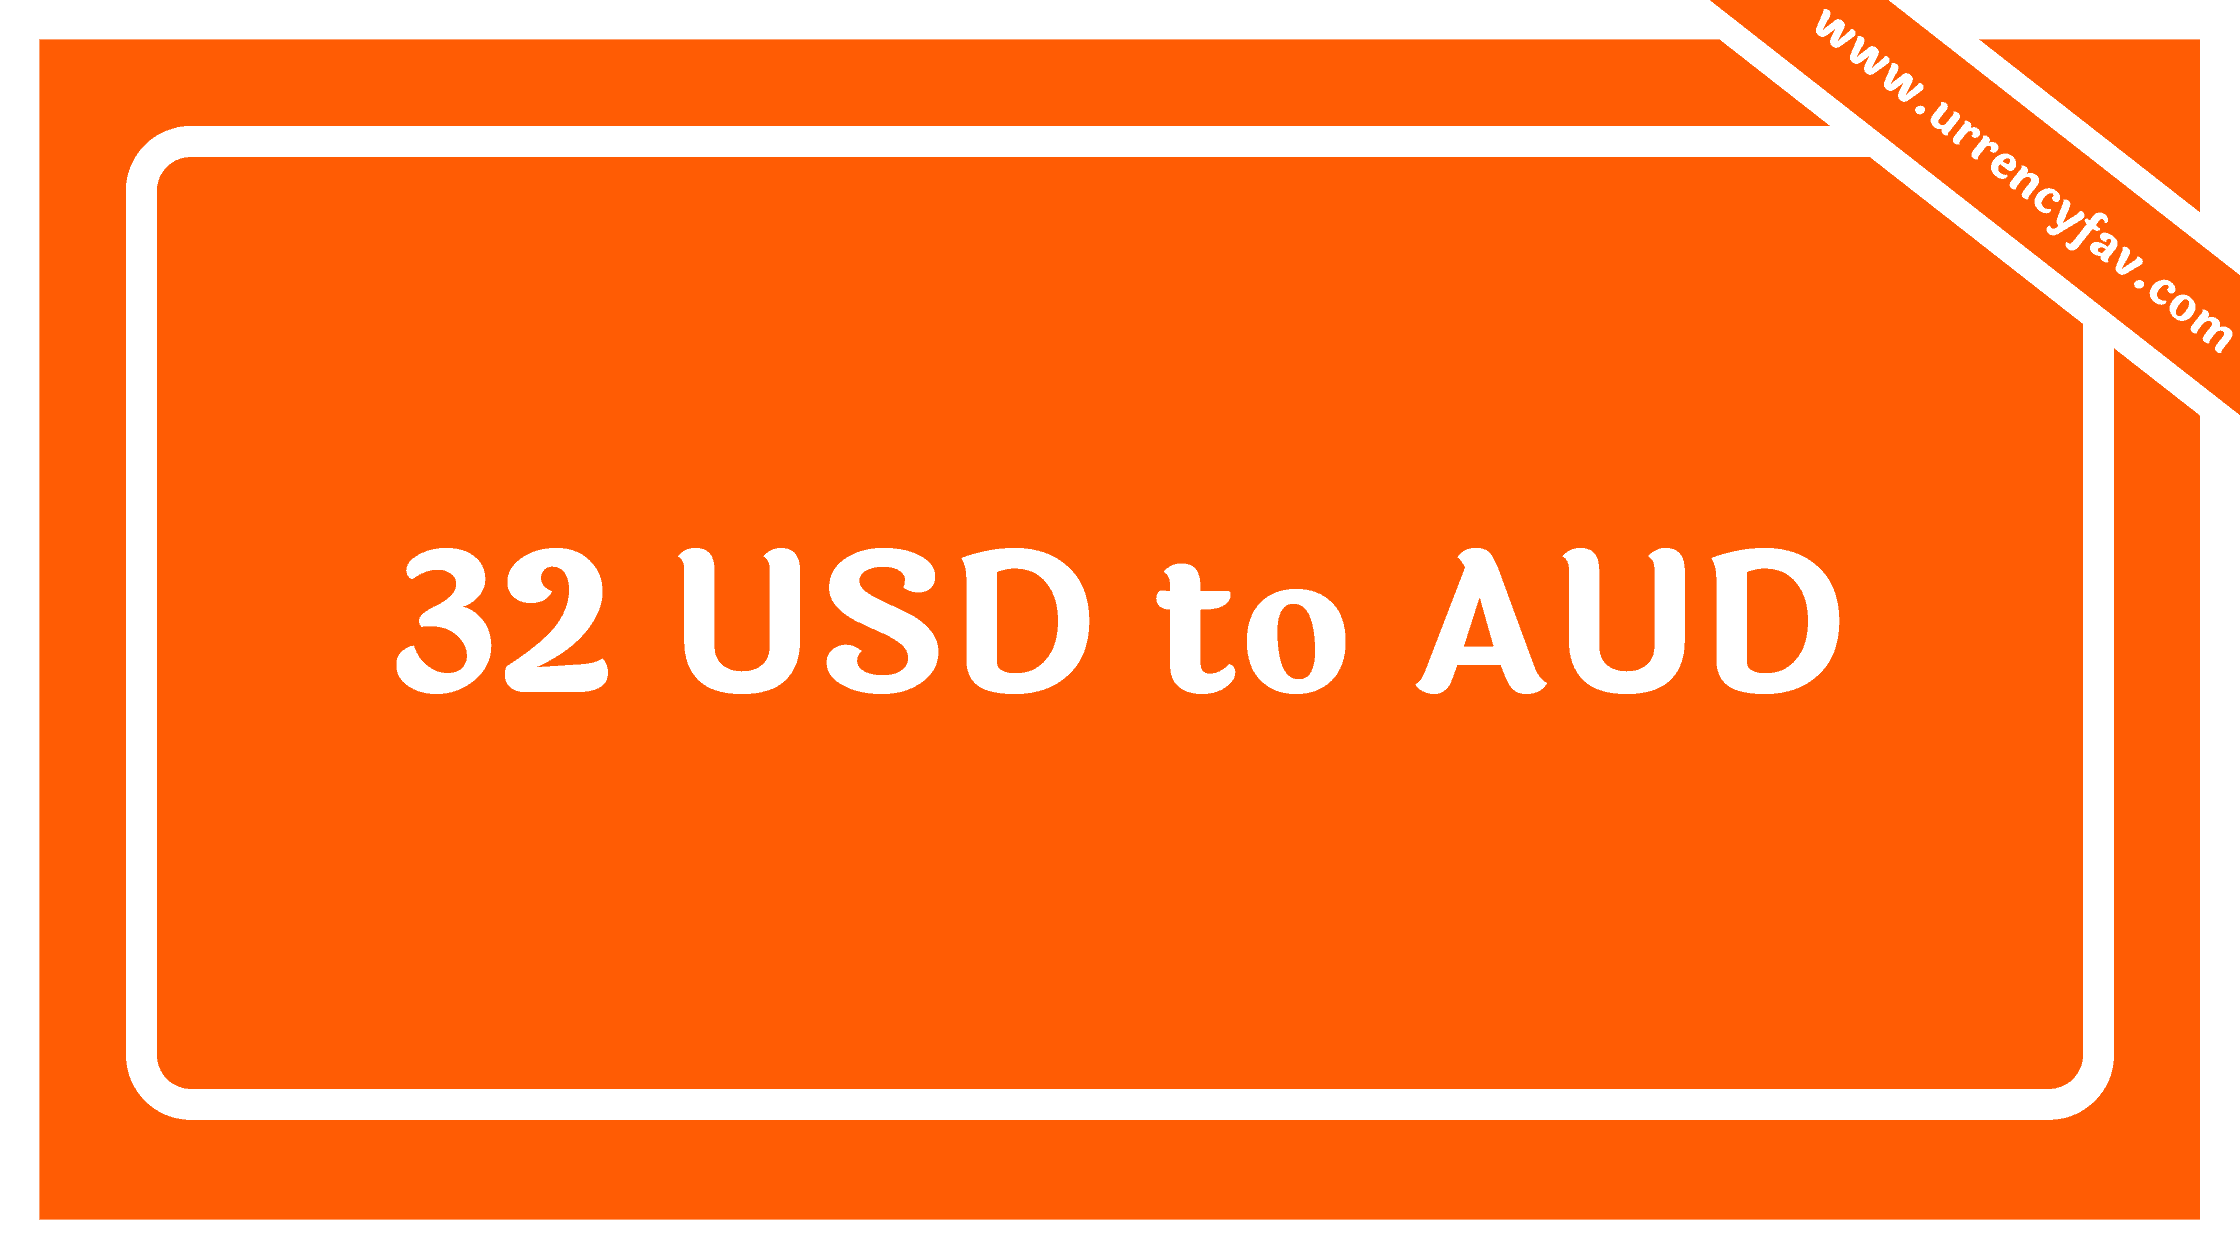 32 USD to AUD